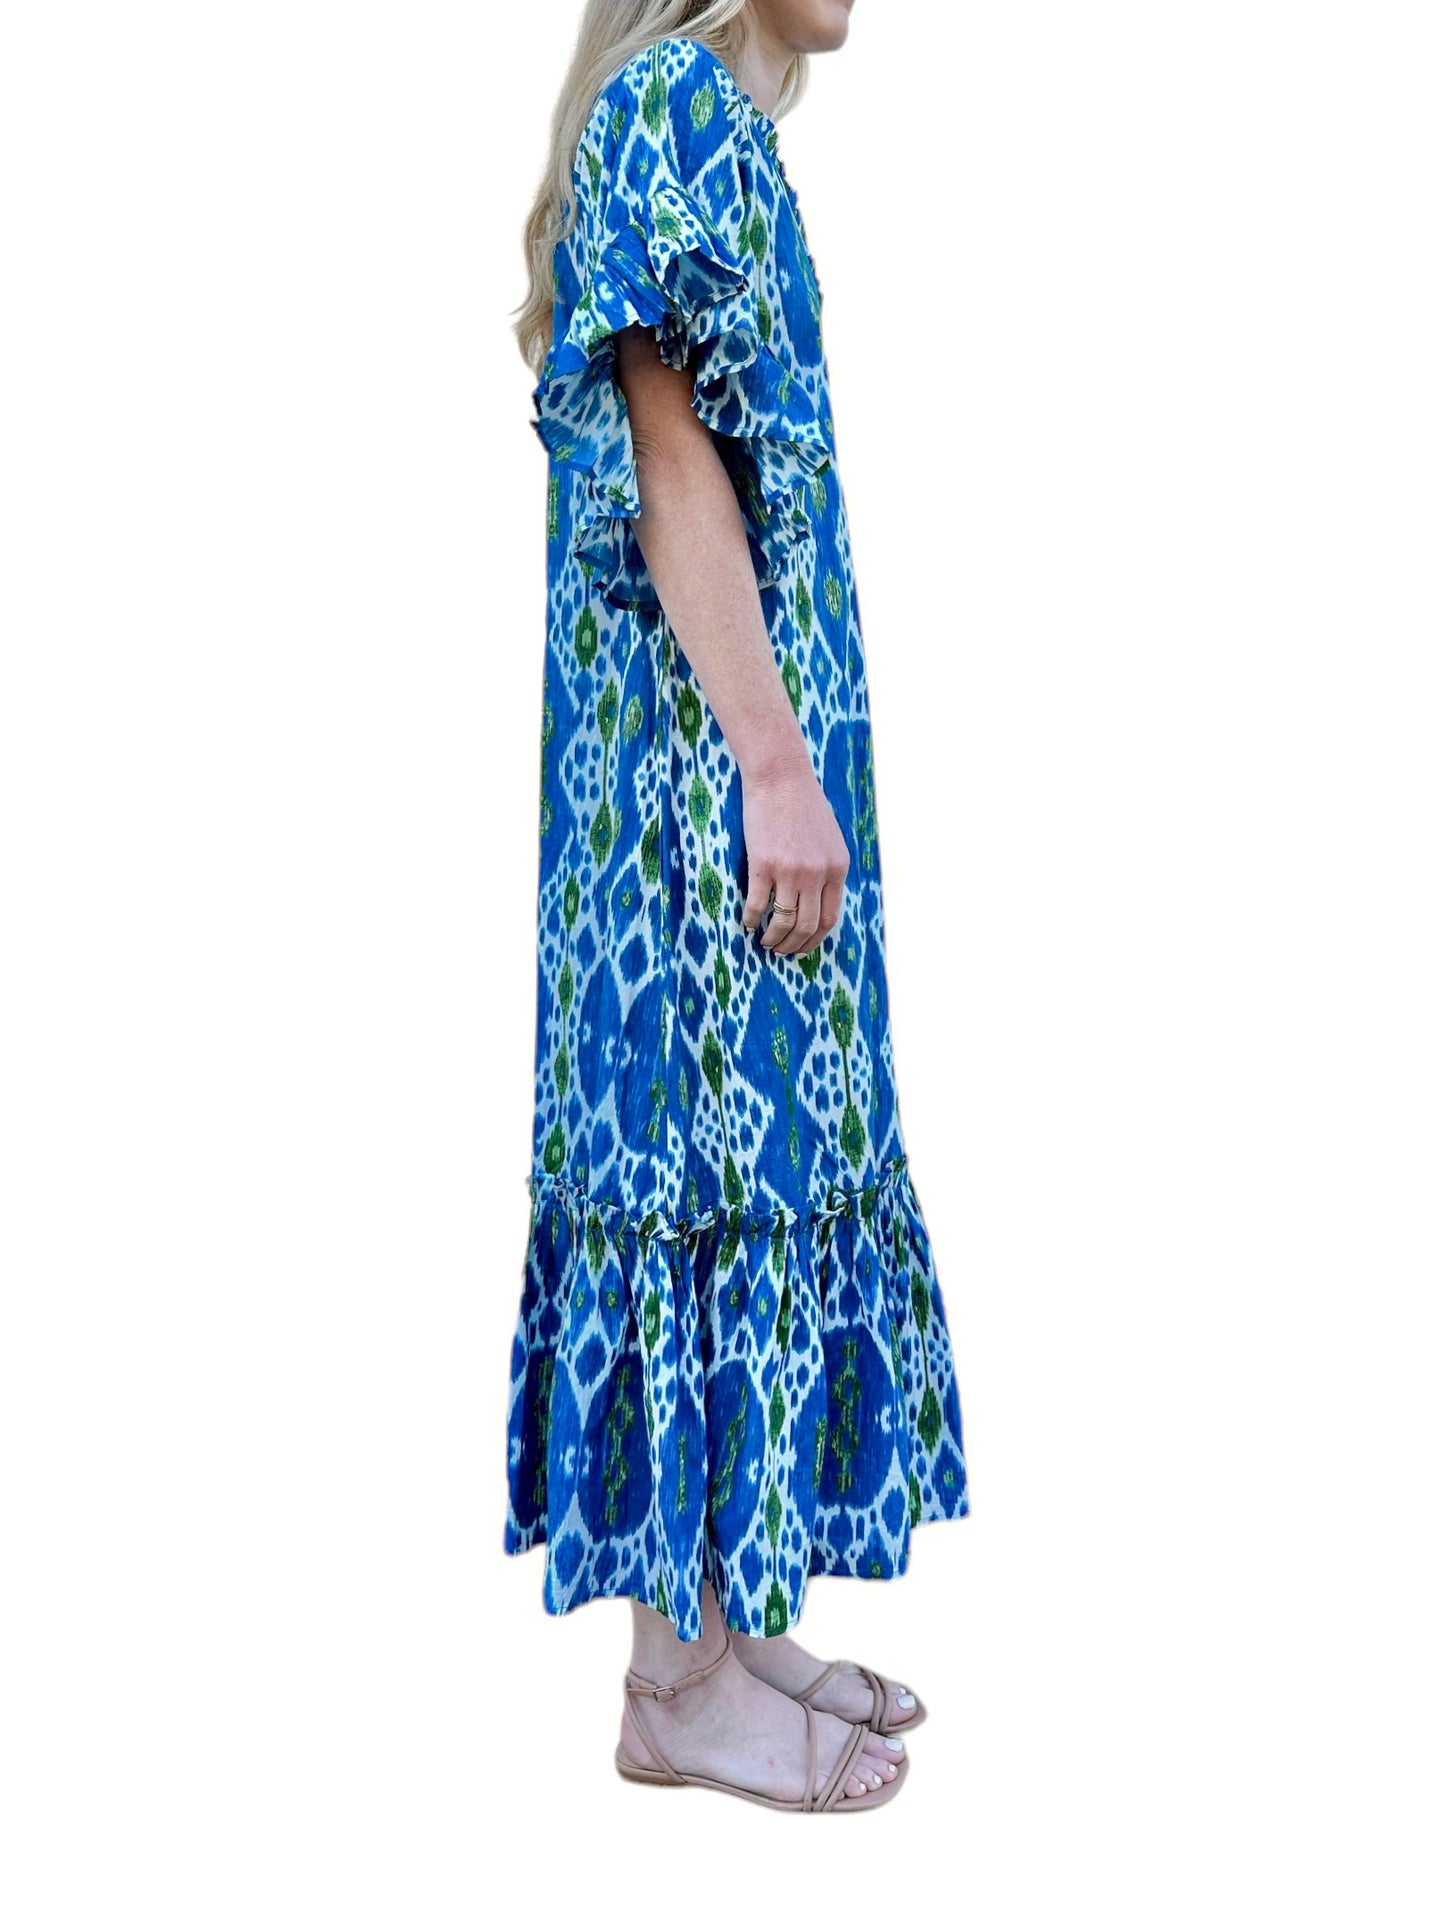 Soleil Flutter Sleeve Maxi Dress in turquoise ikat by Fitzroy & Willa